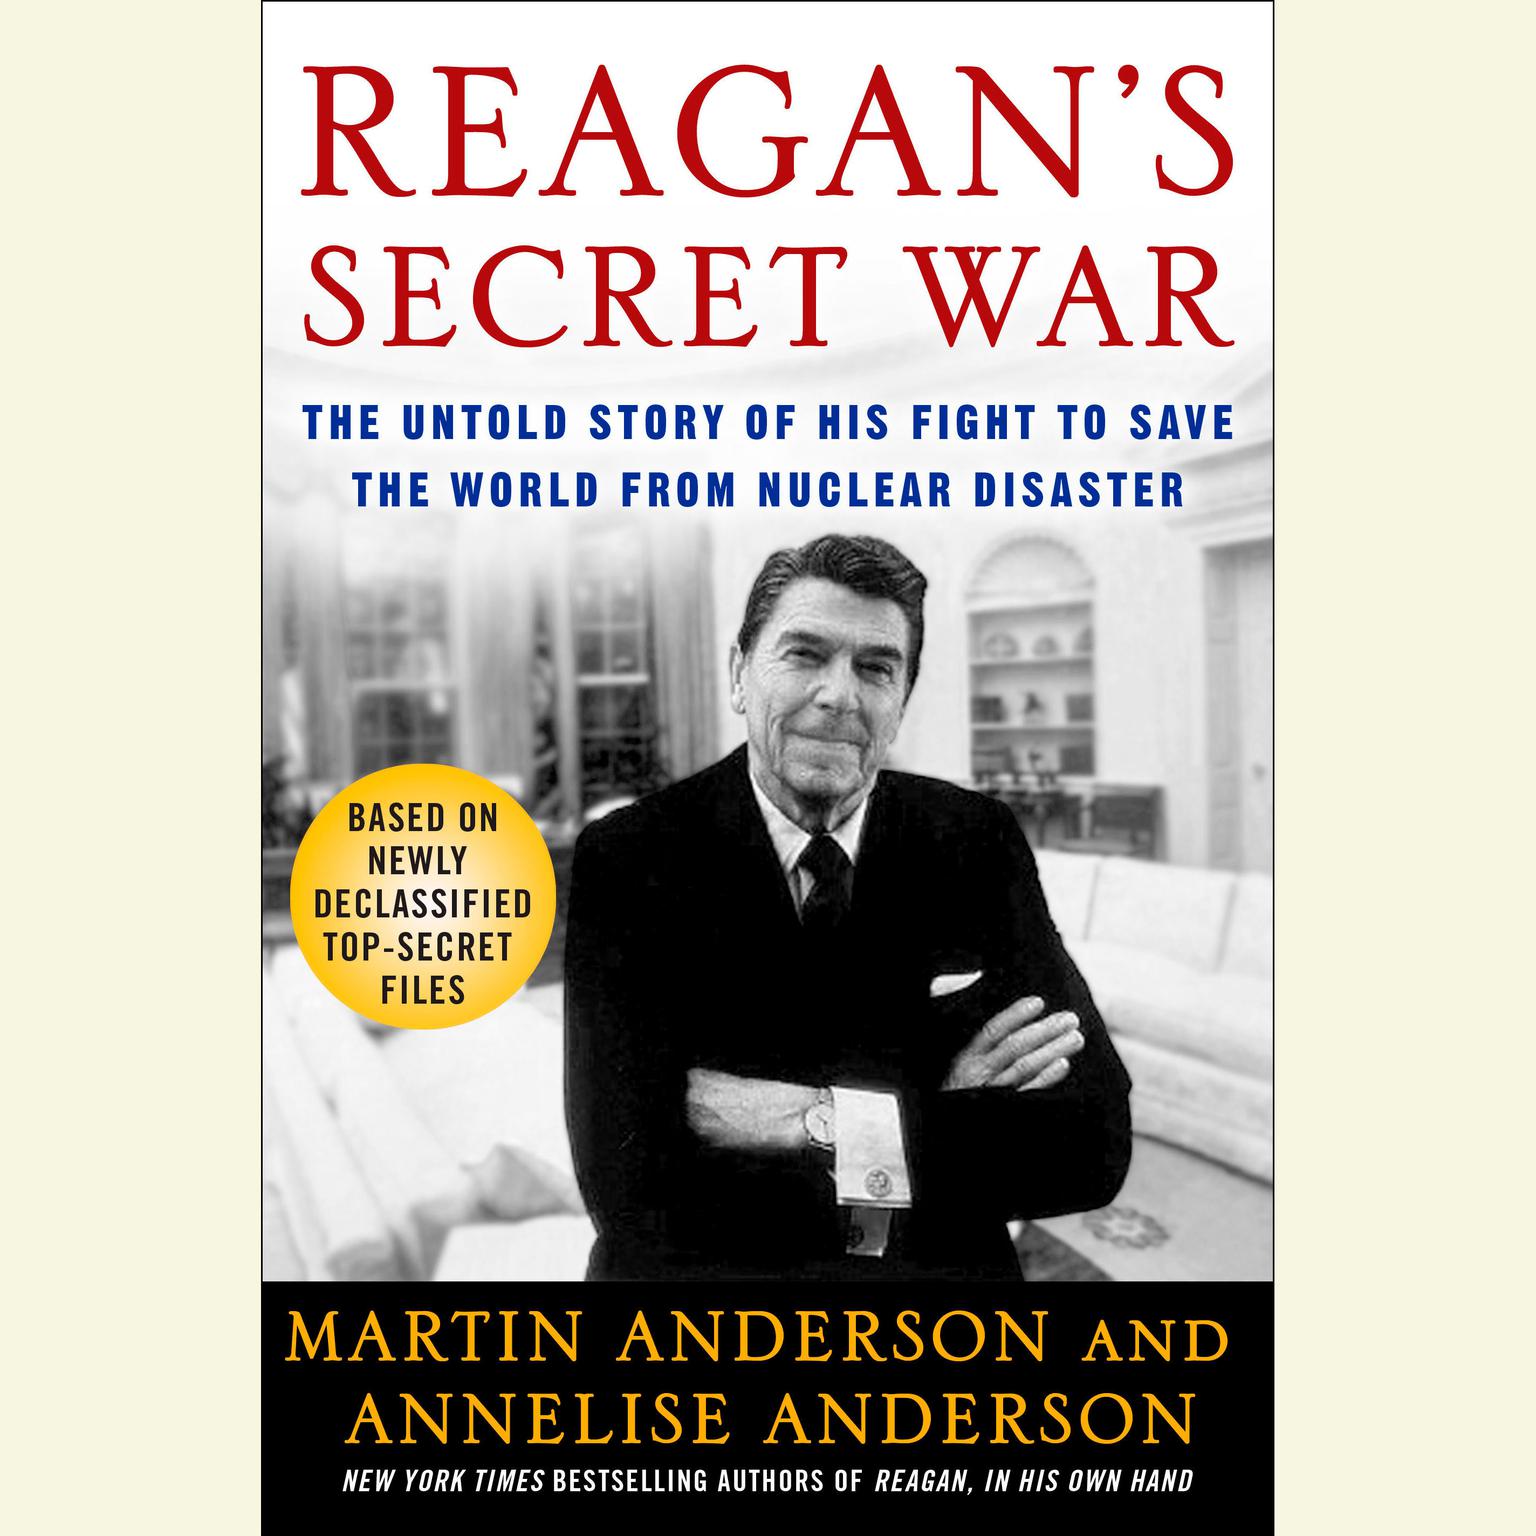 Reagans Secret War: The Untold Story of His Fight to Save the World from Nuclear Disaster Audiobook, by Martin Anderson